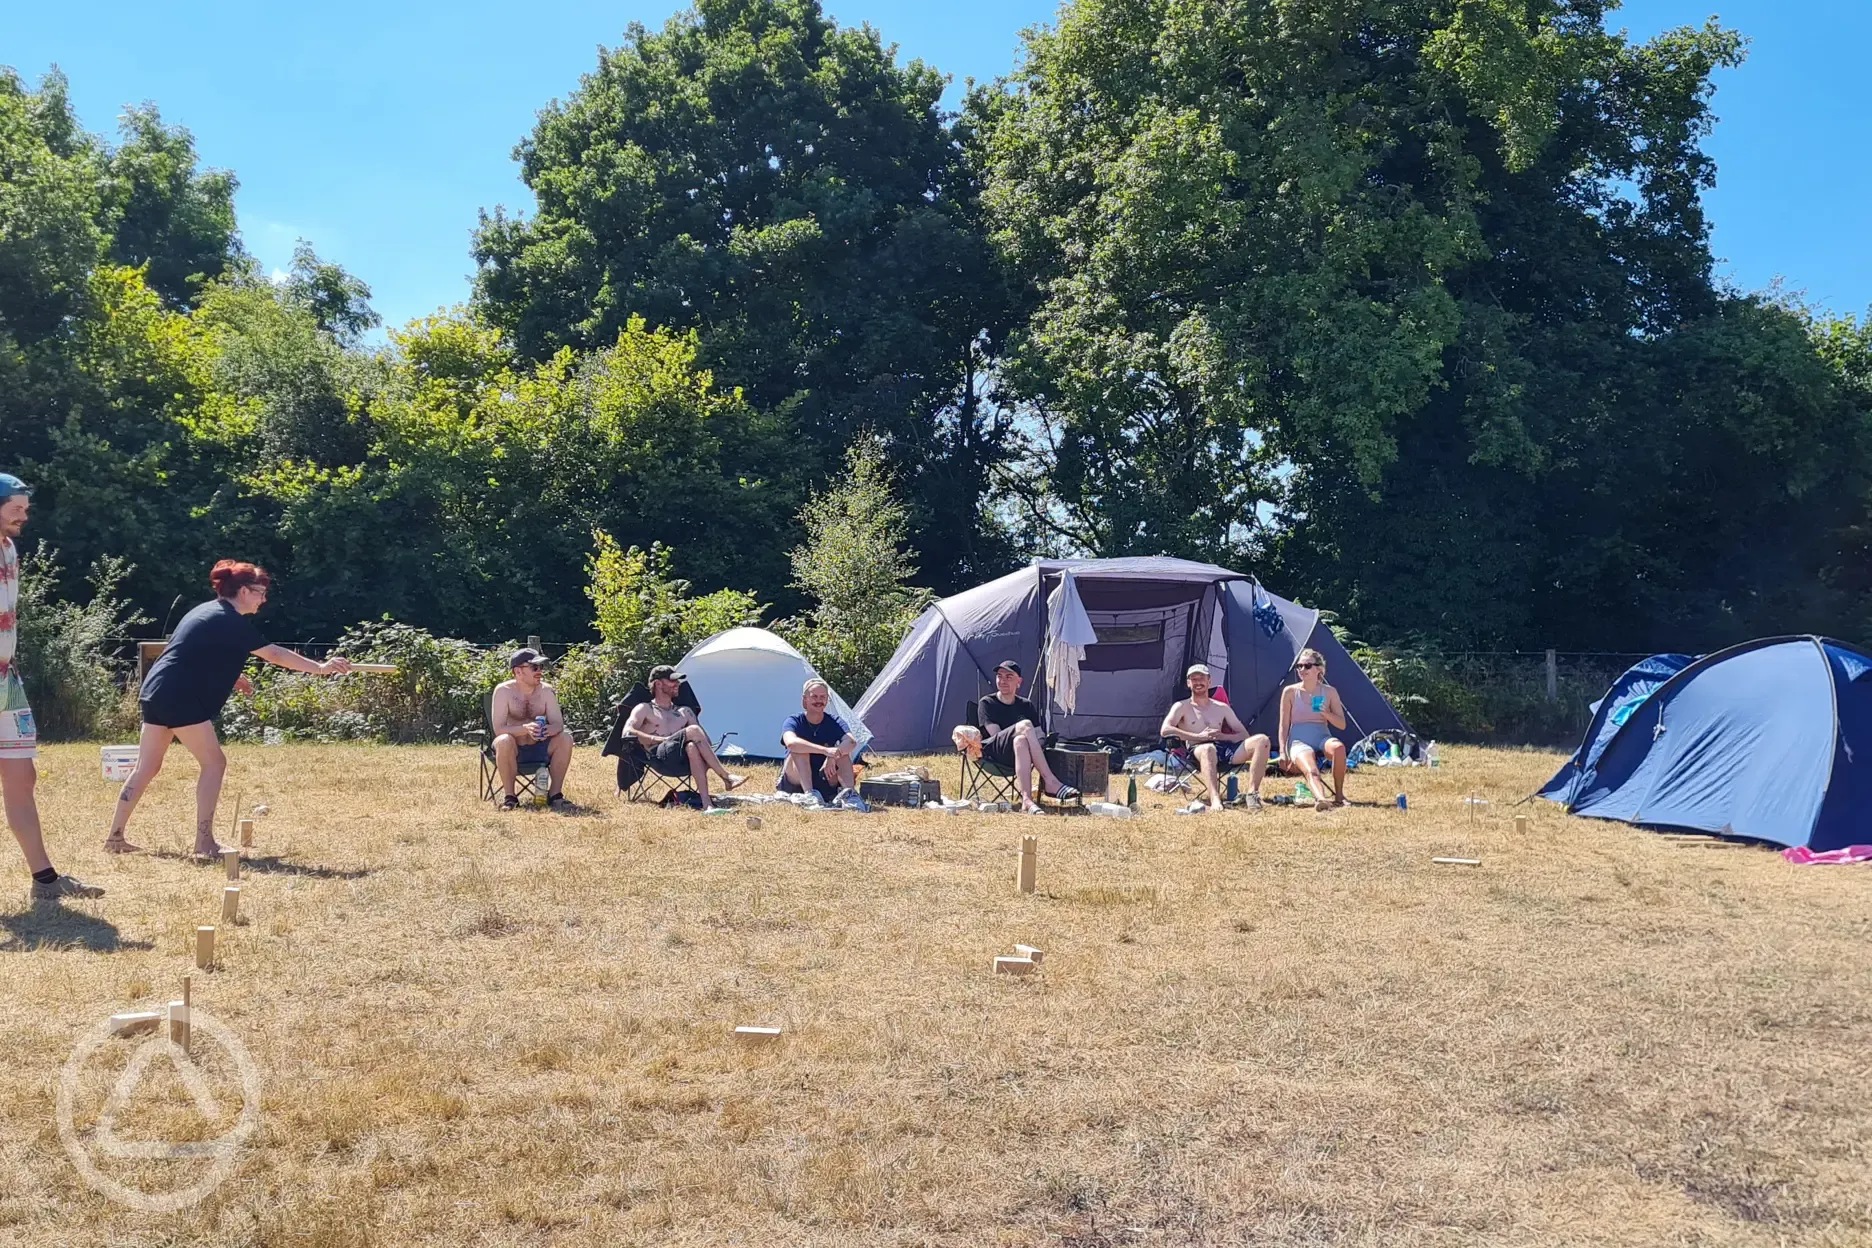 Games in the camping field